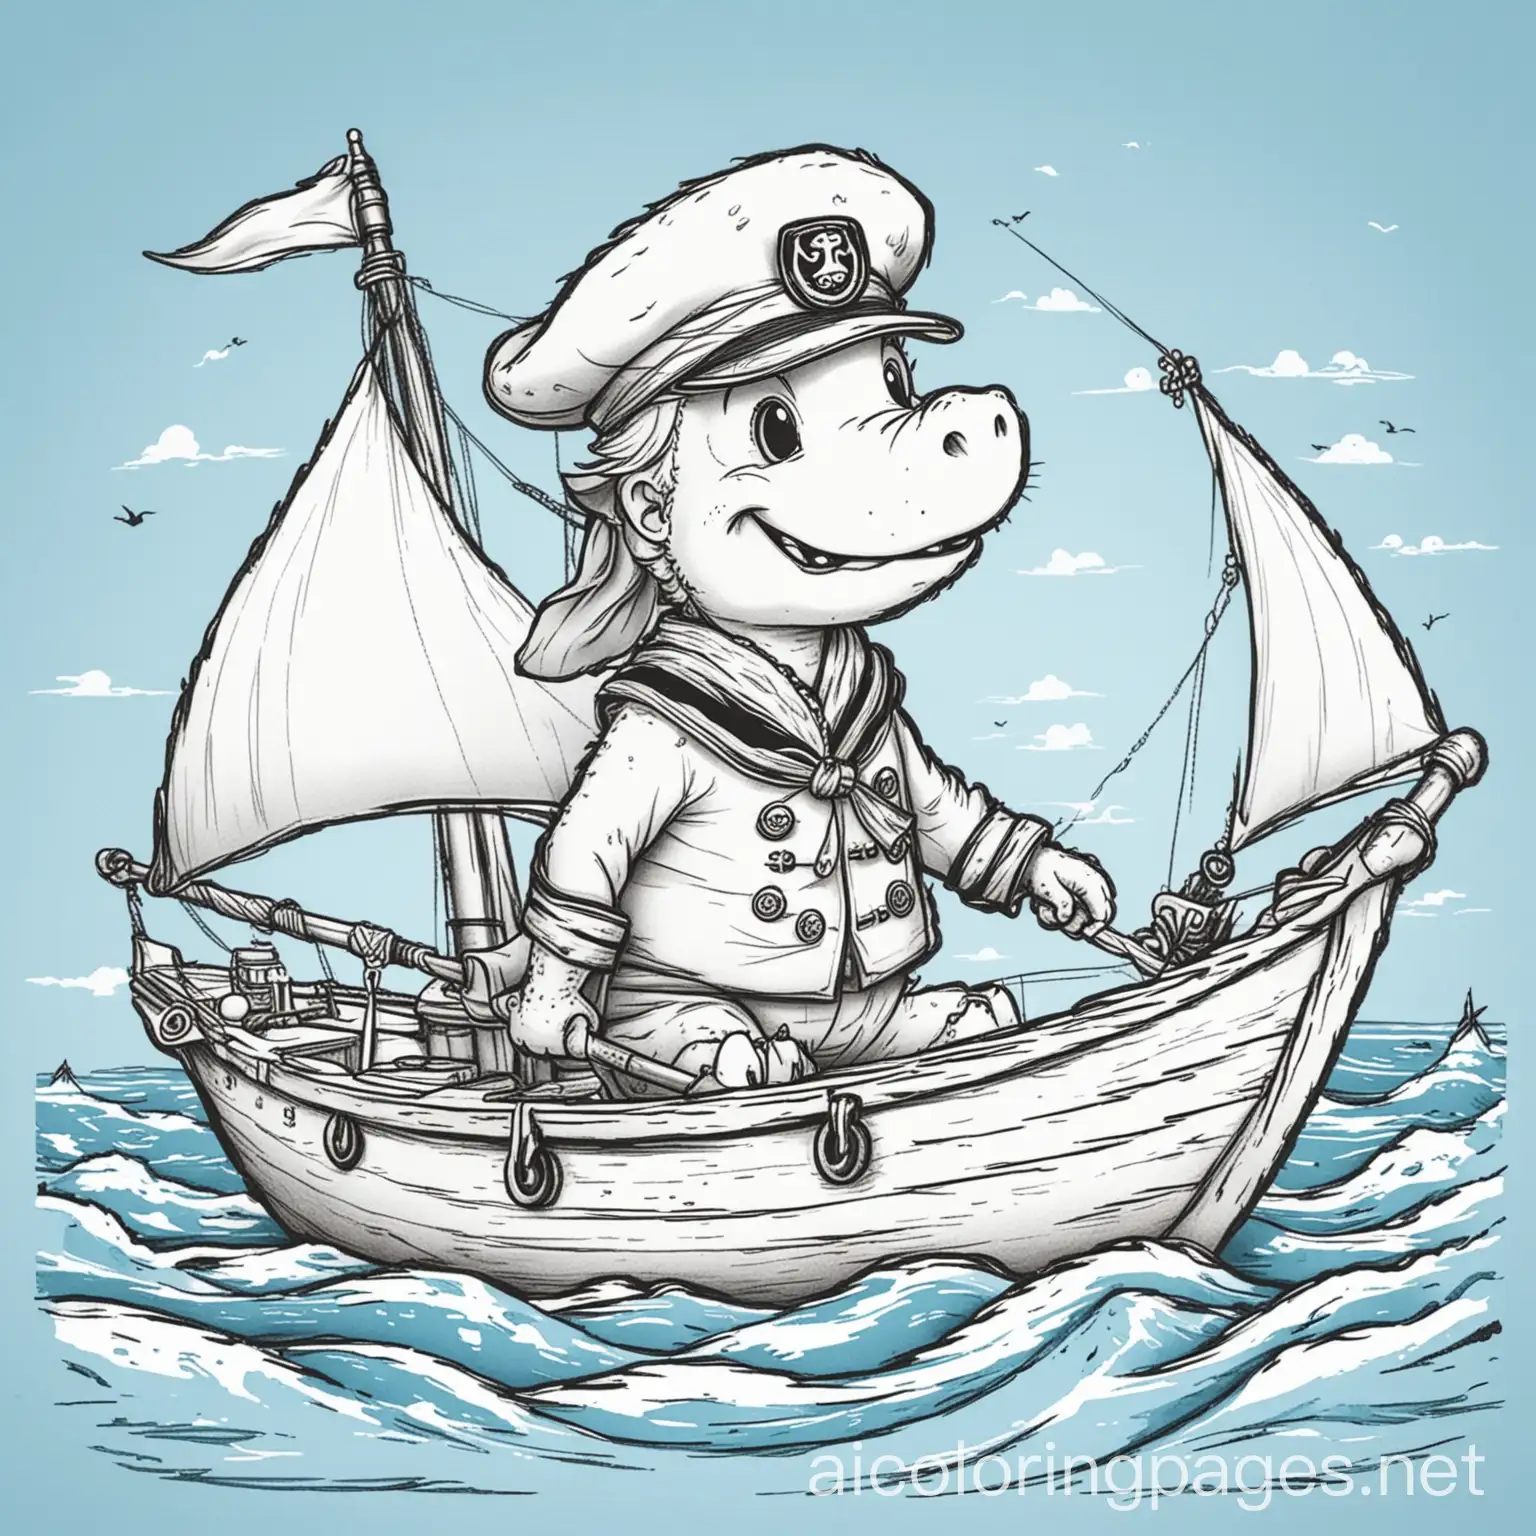 A disney cartoon type style cute crocodile dressed as a sailor on a yacht with sails, the open sea, and a clear blue sky. Colouring Page, black and white, line art, white background, Simplicity, Ample White Space. The background of the colouring page is plain white to make it easy for young children to colour within the lines. The outlines of all the subjects are easy to distinguish, making it simple for kids to colour without too much difficulty , Colouring Page, black and white, line art, white background, Simplicity, Ample White Space. The background of the colouring page is plain white to make it easy for young children to colour within the lines. The outlines of all the subjects are easy to distinguish, making it simple for kids to colour without too much difficulty , Coloring Page, black and white, line art, white background, Simplicity, Ample White Space. The background of the coloring page is plain white to make it easy for young children to color within the lines. The outlines of all the subjects are easy to distinguish, making it simple for kids to color without too much difficulty